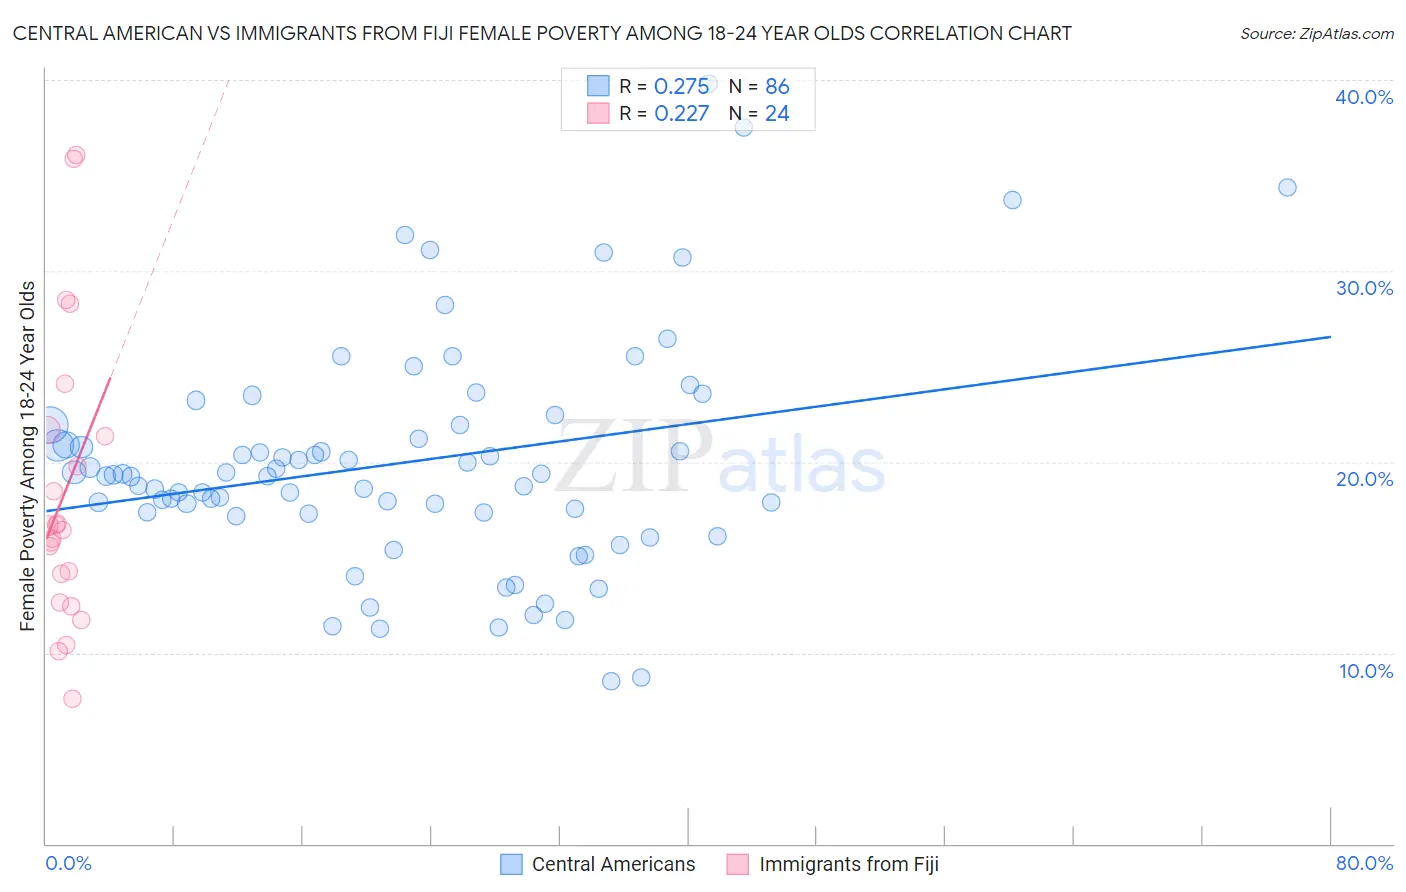 Central American vs Immigrants from Fiji Female Poverty Among 18-24 Year Olds